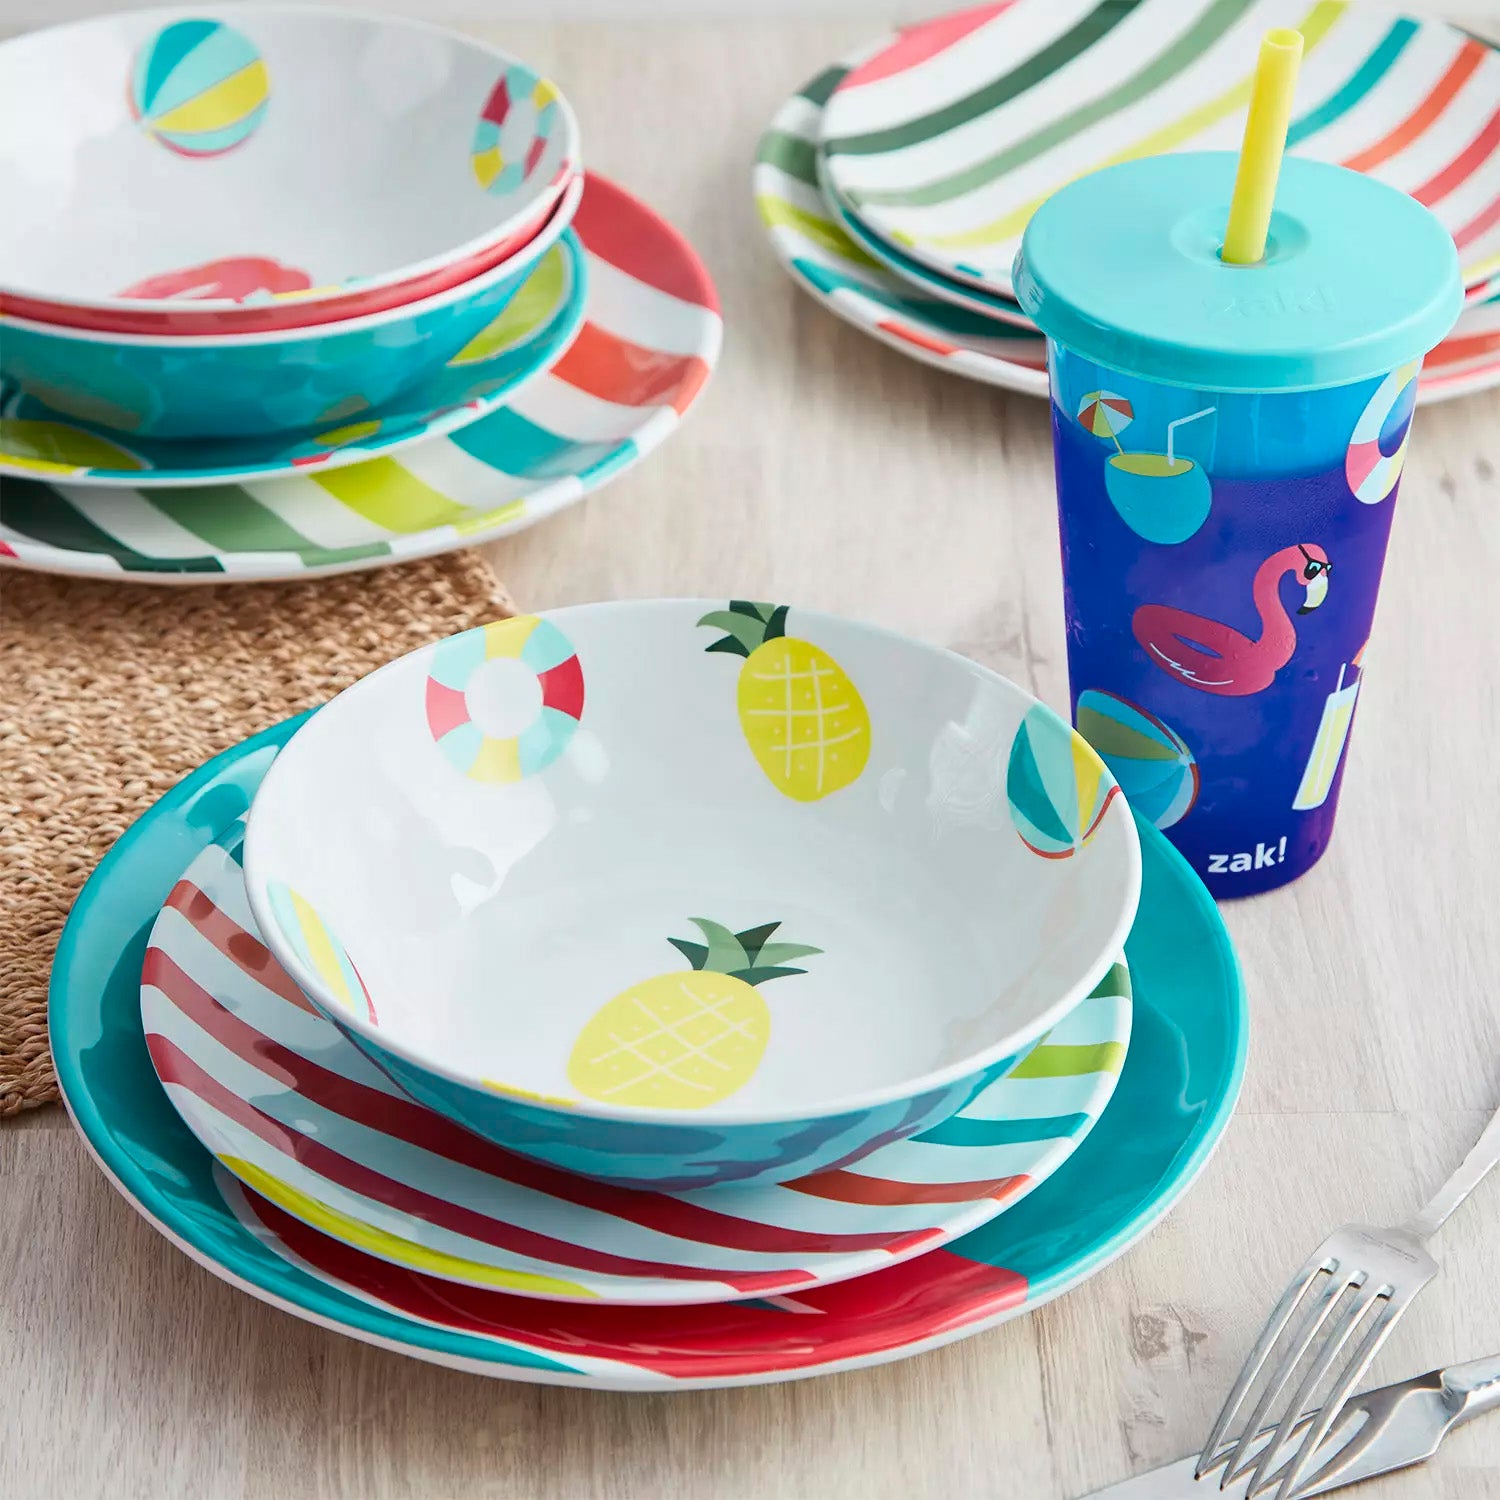 New! Bluey Design by Zak Designs - Set of 4 - Plate, Bowl, Flatware, and 16  oz